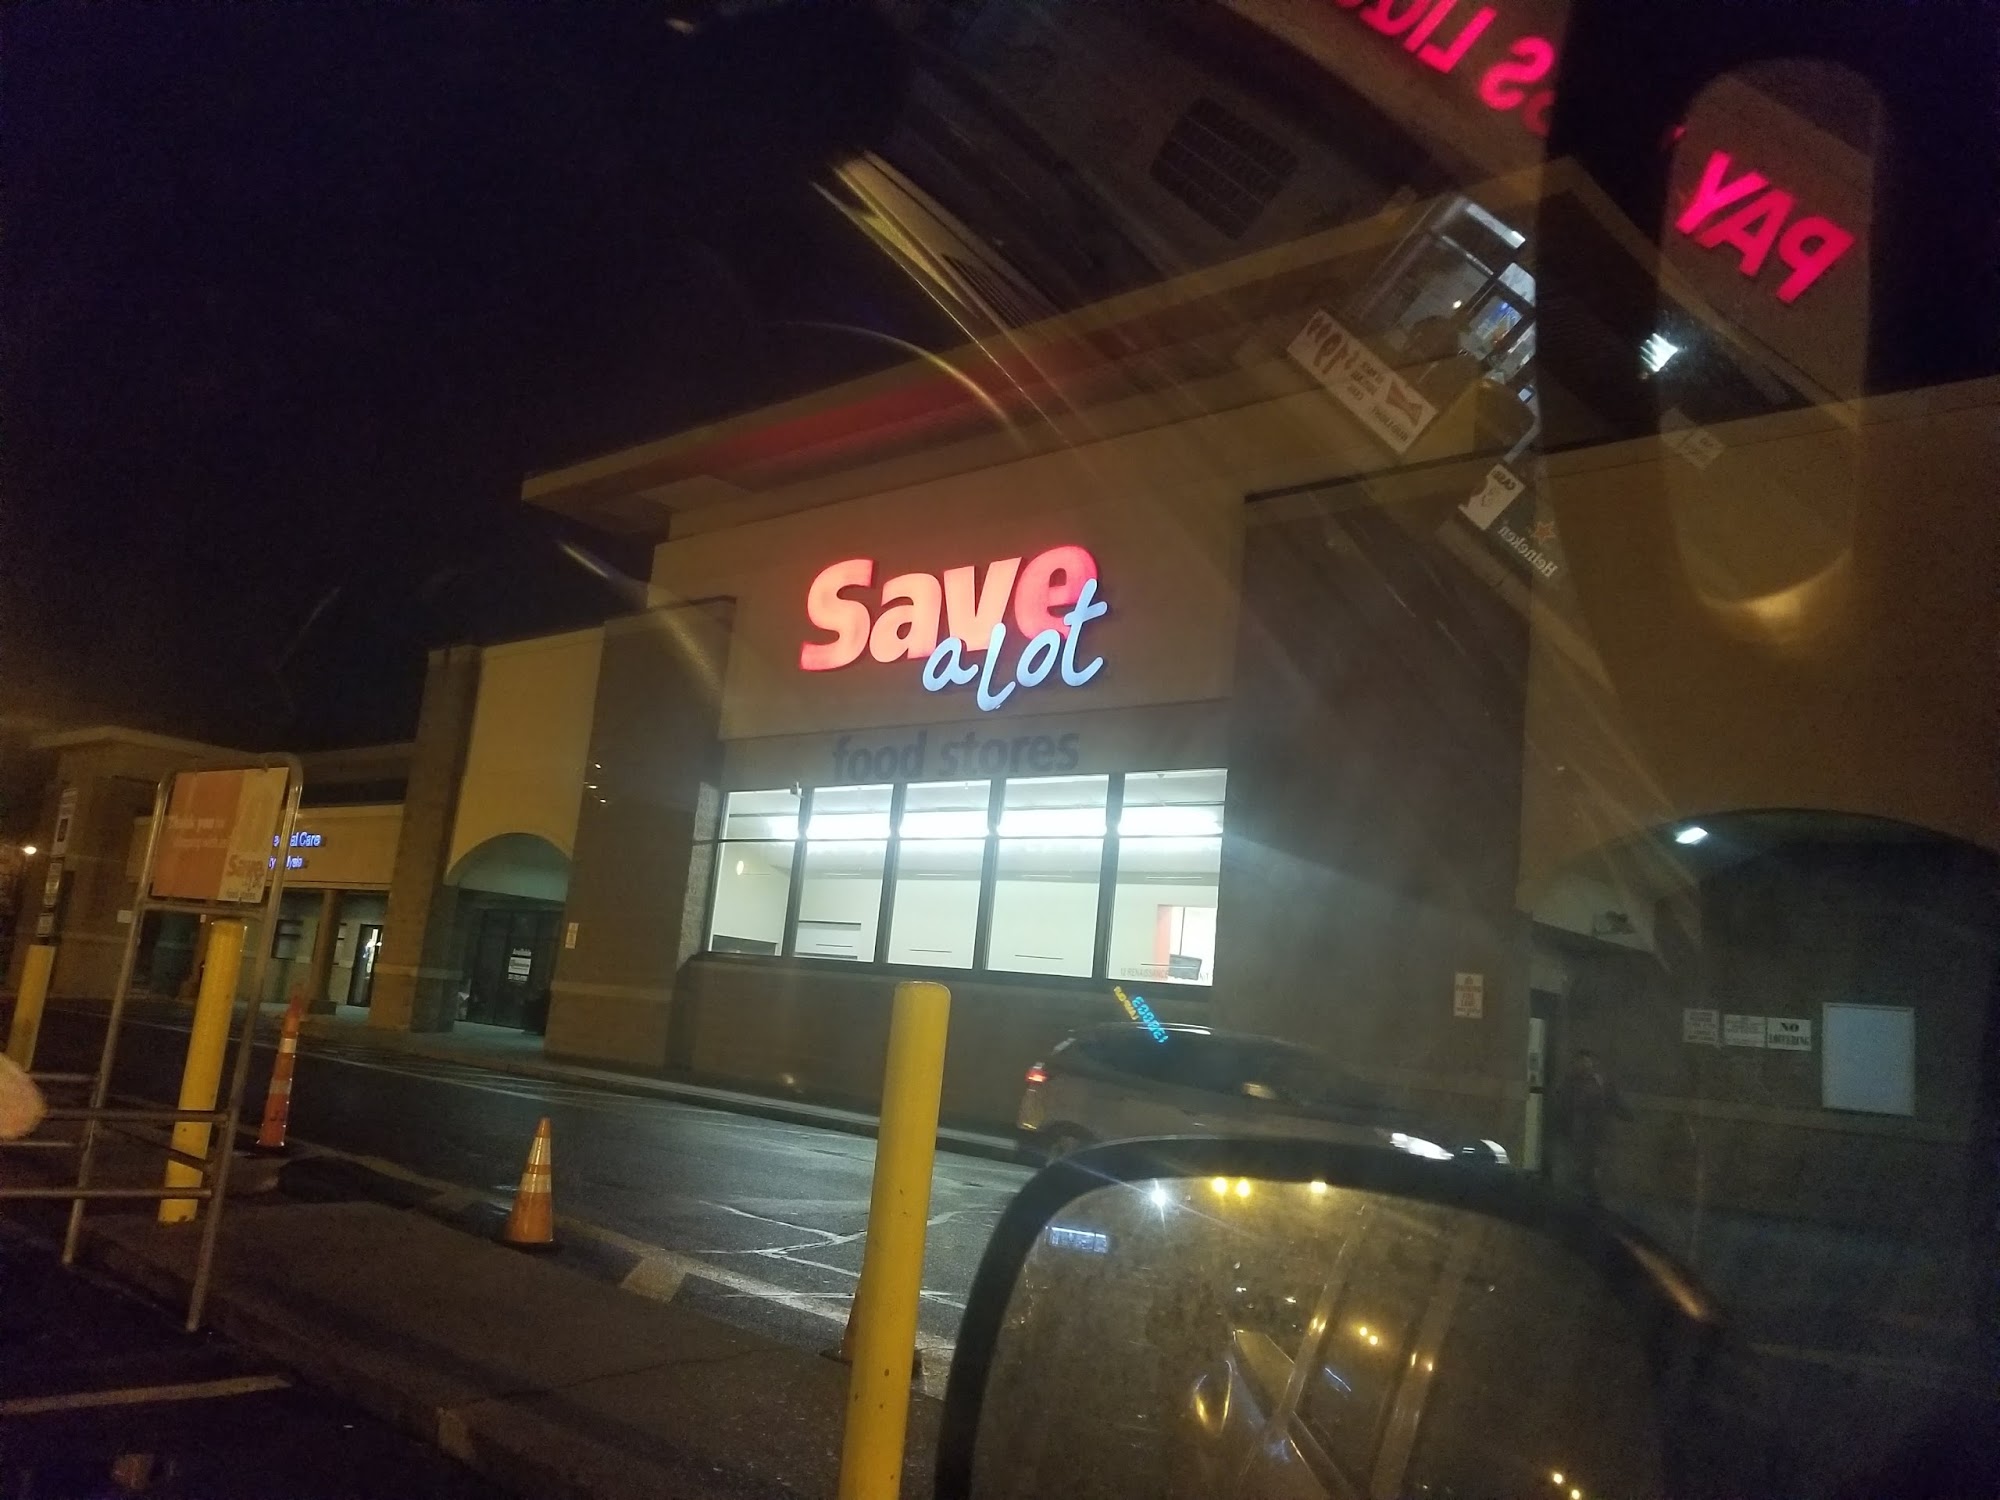 Save A Lot